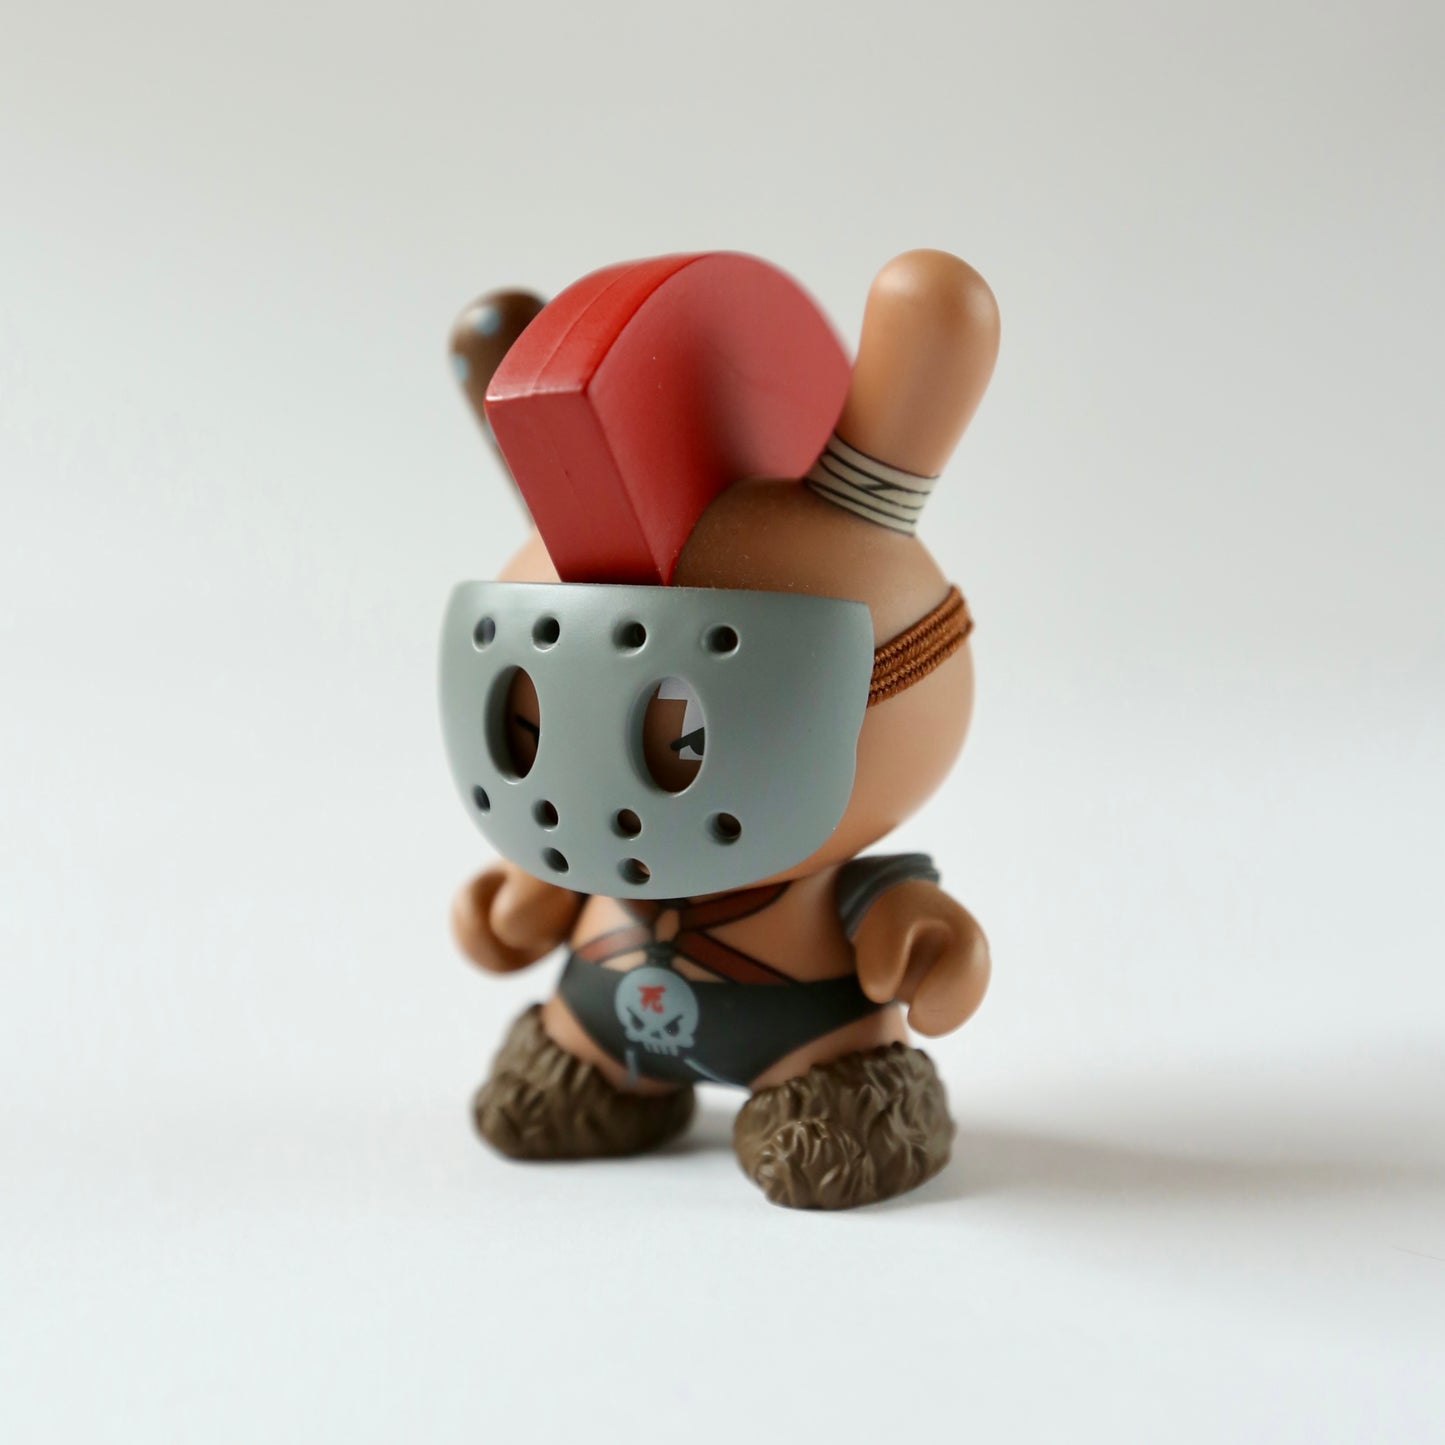 "Dog" 3in Dunny by Huck Gee x Kidrobot *SIGNED*